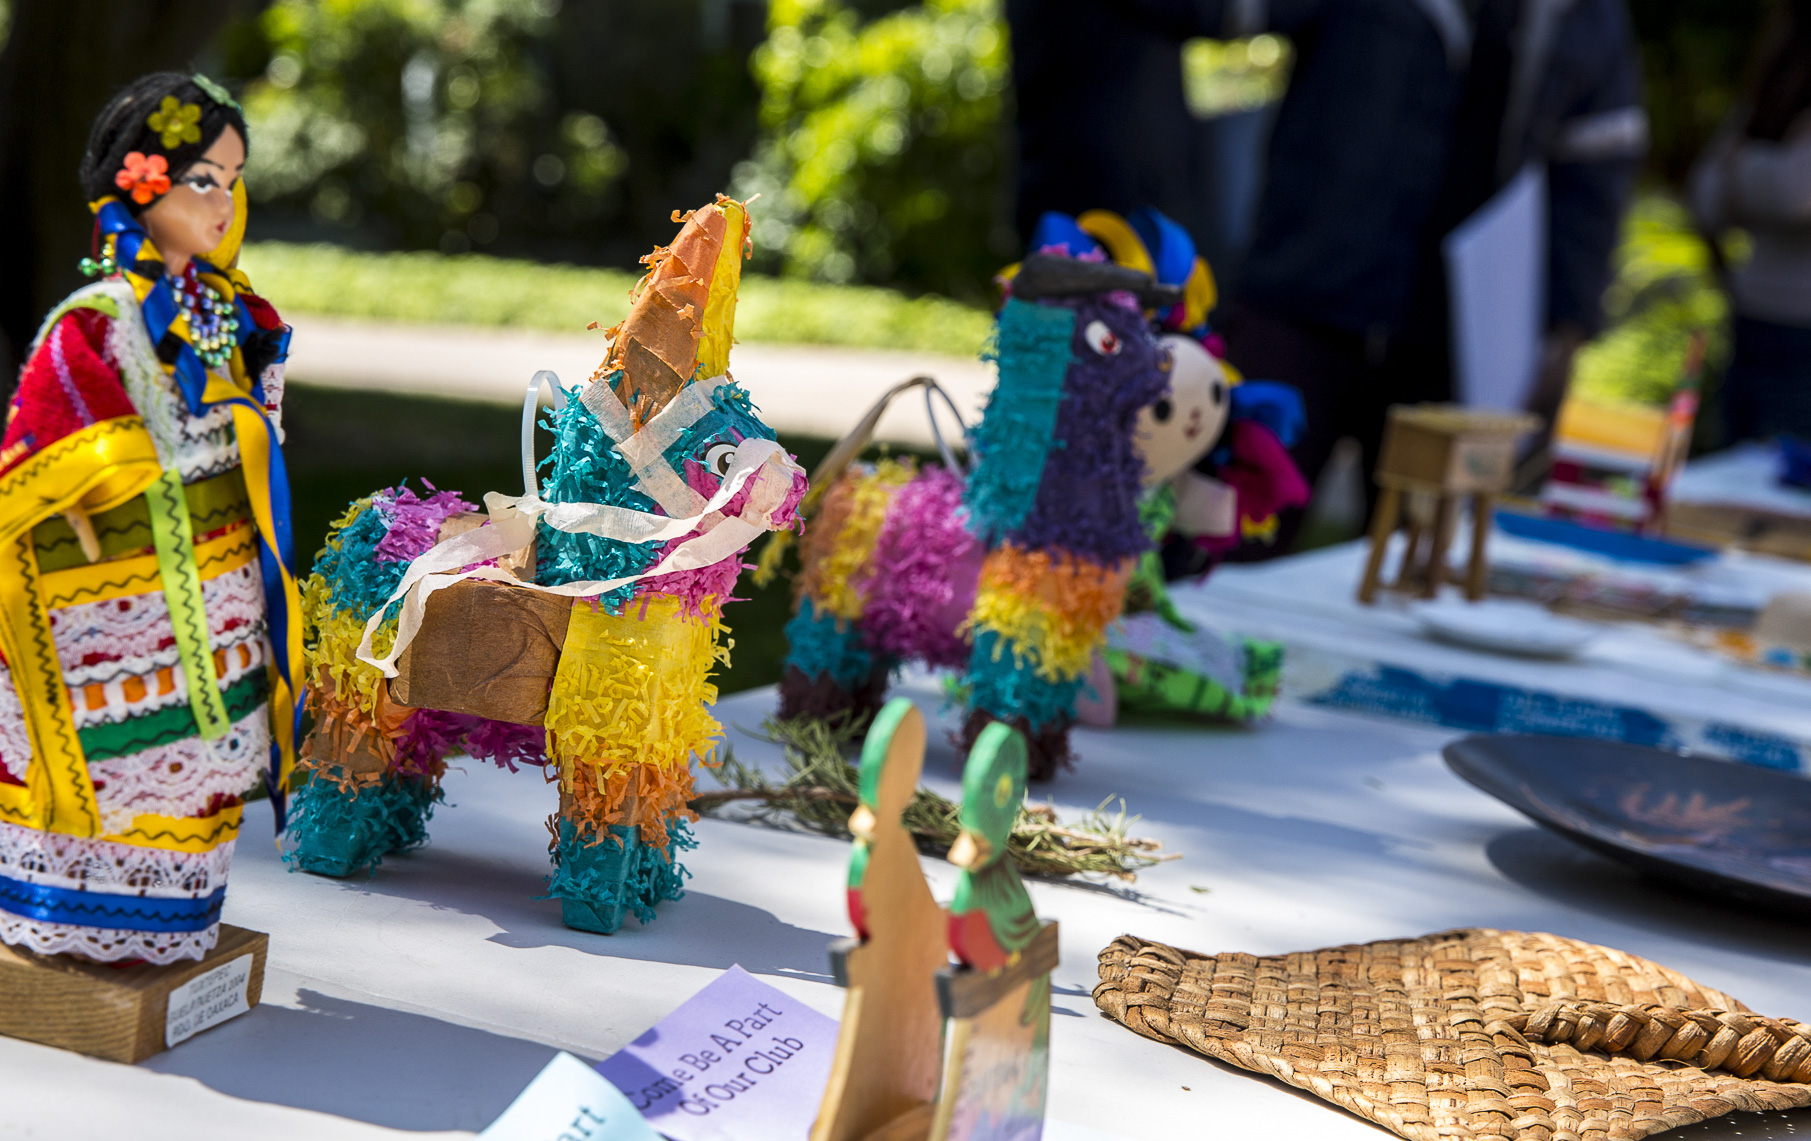  A shot of a table with paraphernalia consisting of items that represent Cinco De Mayo and pamphlets asking students to join the Santa Monica College club that hosted the event, “Adelante”, in front of the Santa Monica College (SMC) Clock Tower on th